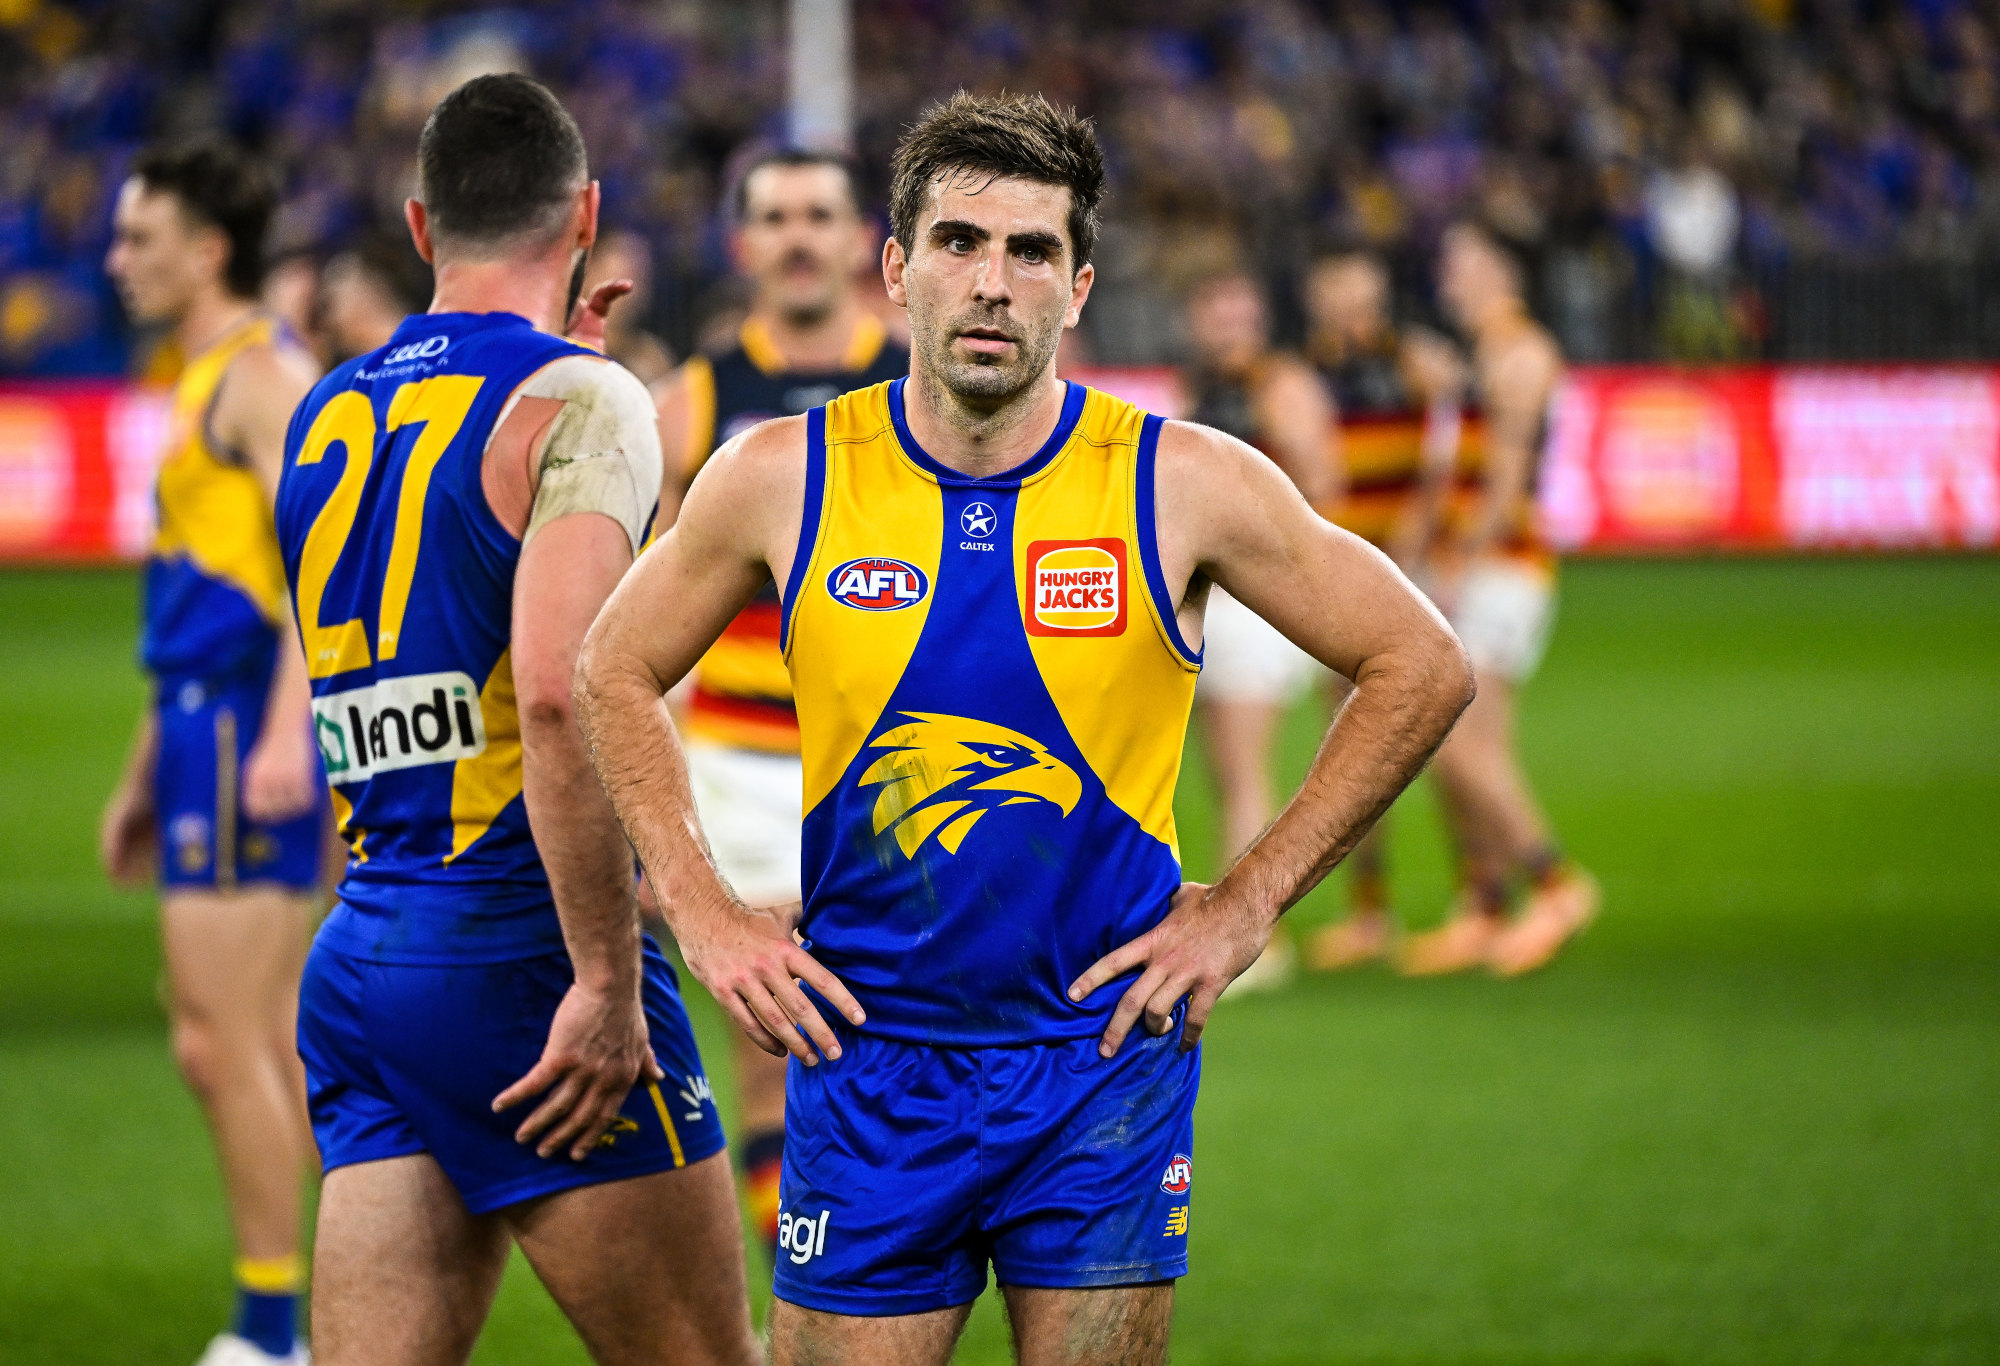 Andrew Gaff of the Eagles looks dejected after losing to Adelaide